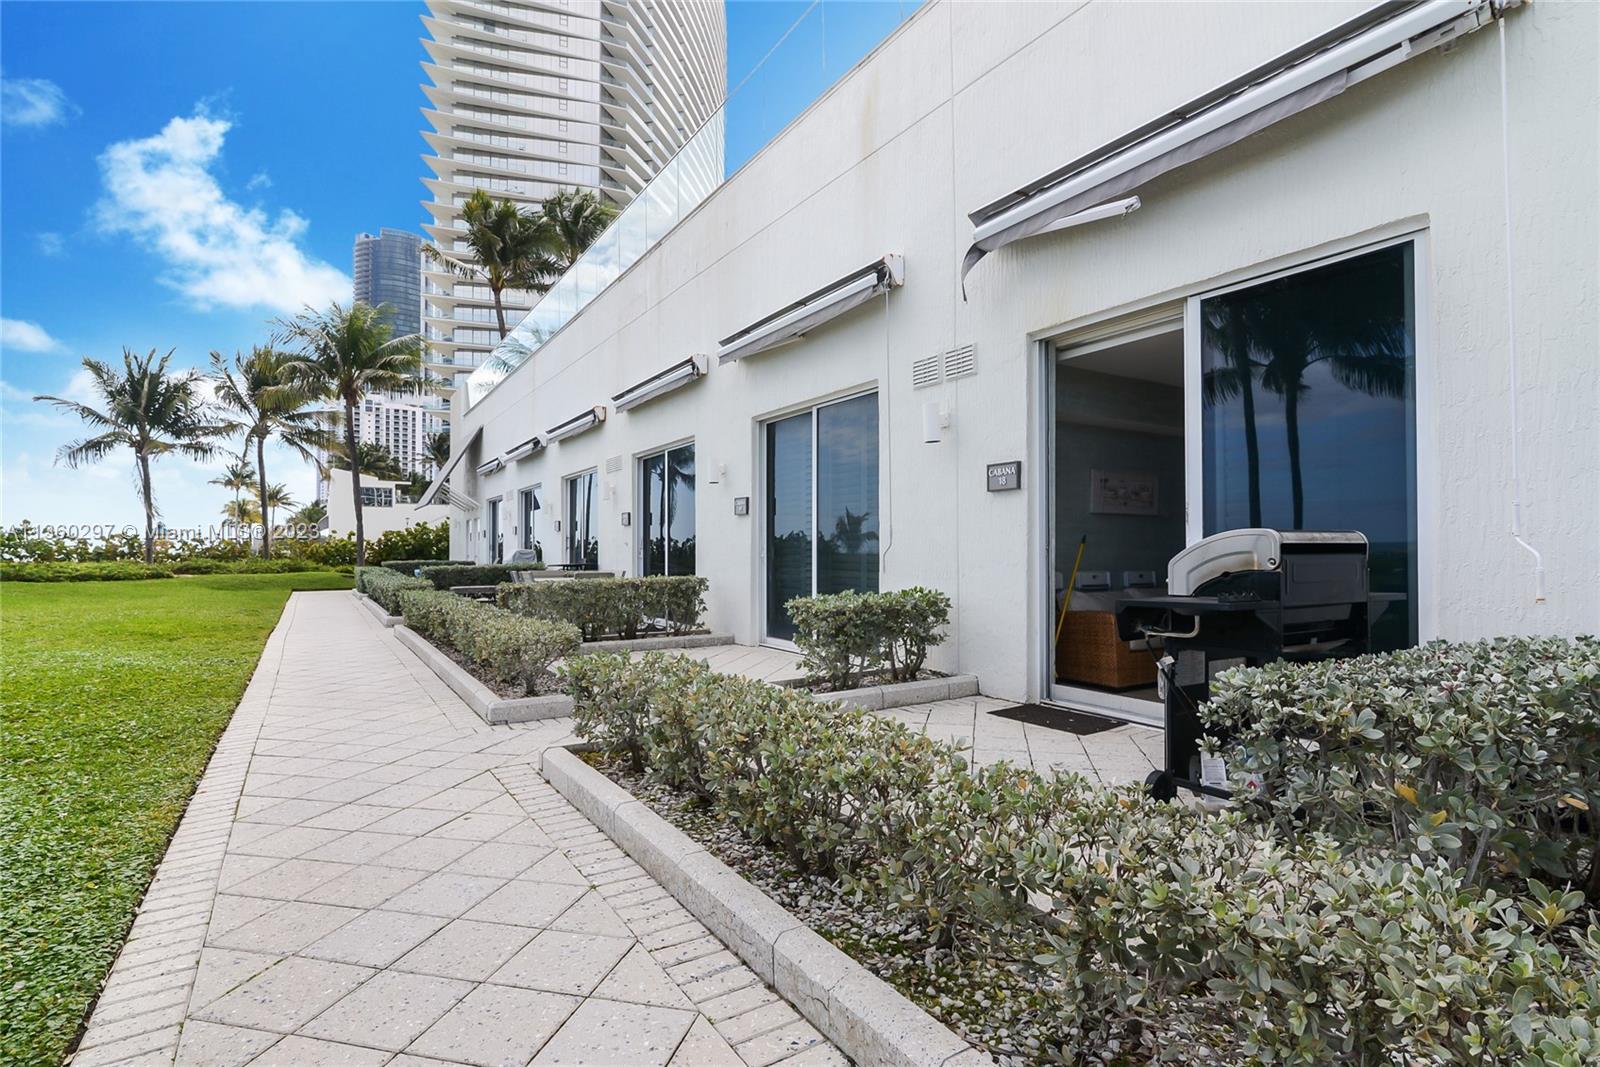 Ocean Two Condo located in Sunny Isles Beach, Private Beach Cabana offered for sale. Recently renova